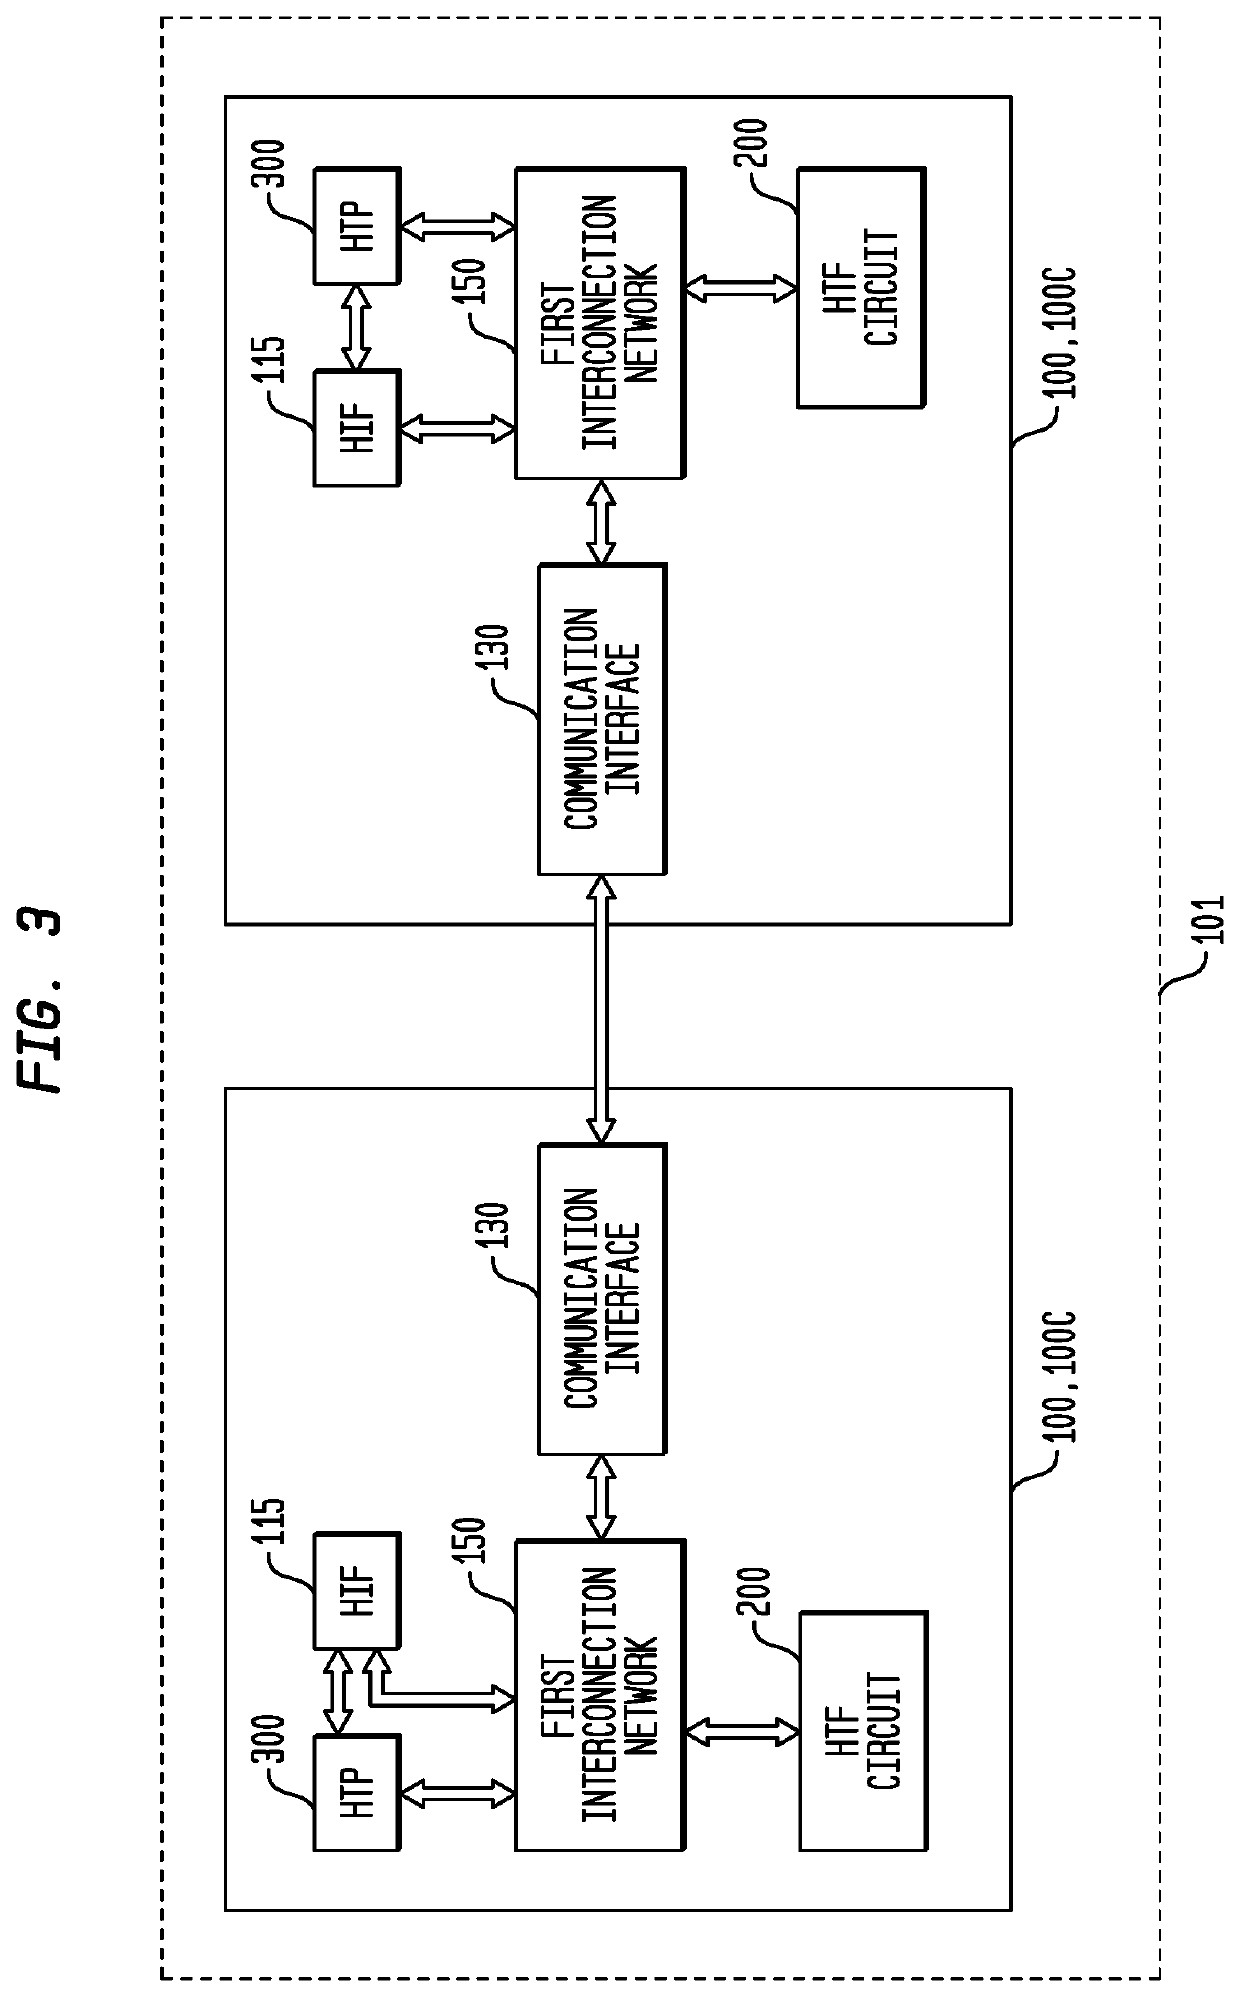 Adjustment of Load Access Size by a Multi-Threaded, Self-Scheduling Processor to Manage Network Congestion